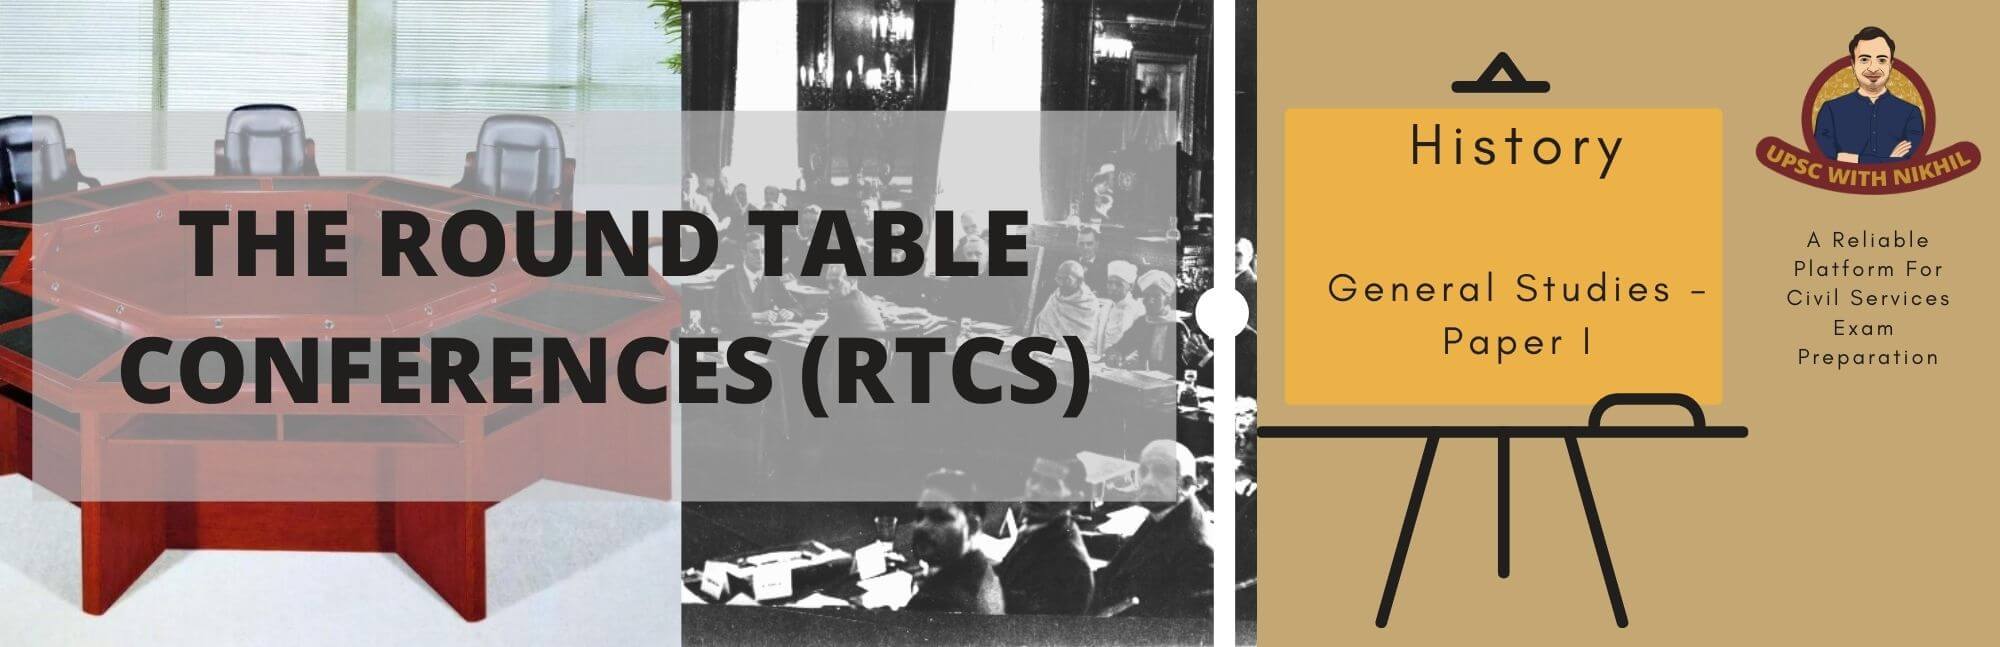 The Round Table Conferences Rtcs, The First Round Table Conference Was Held In Years